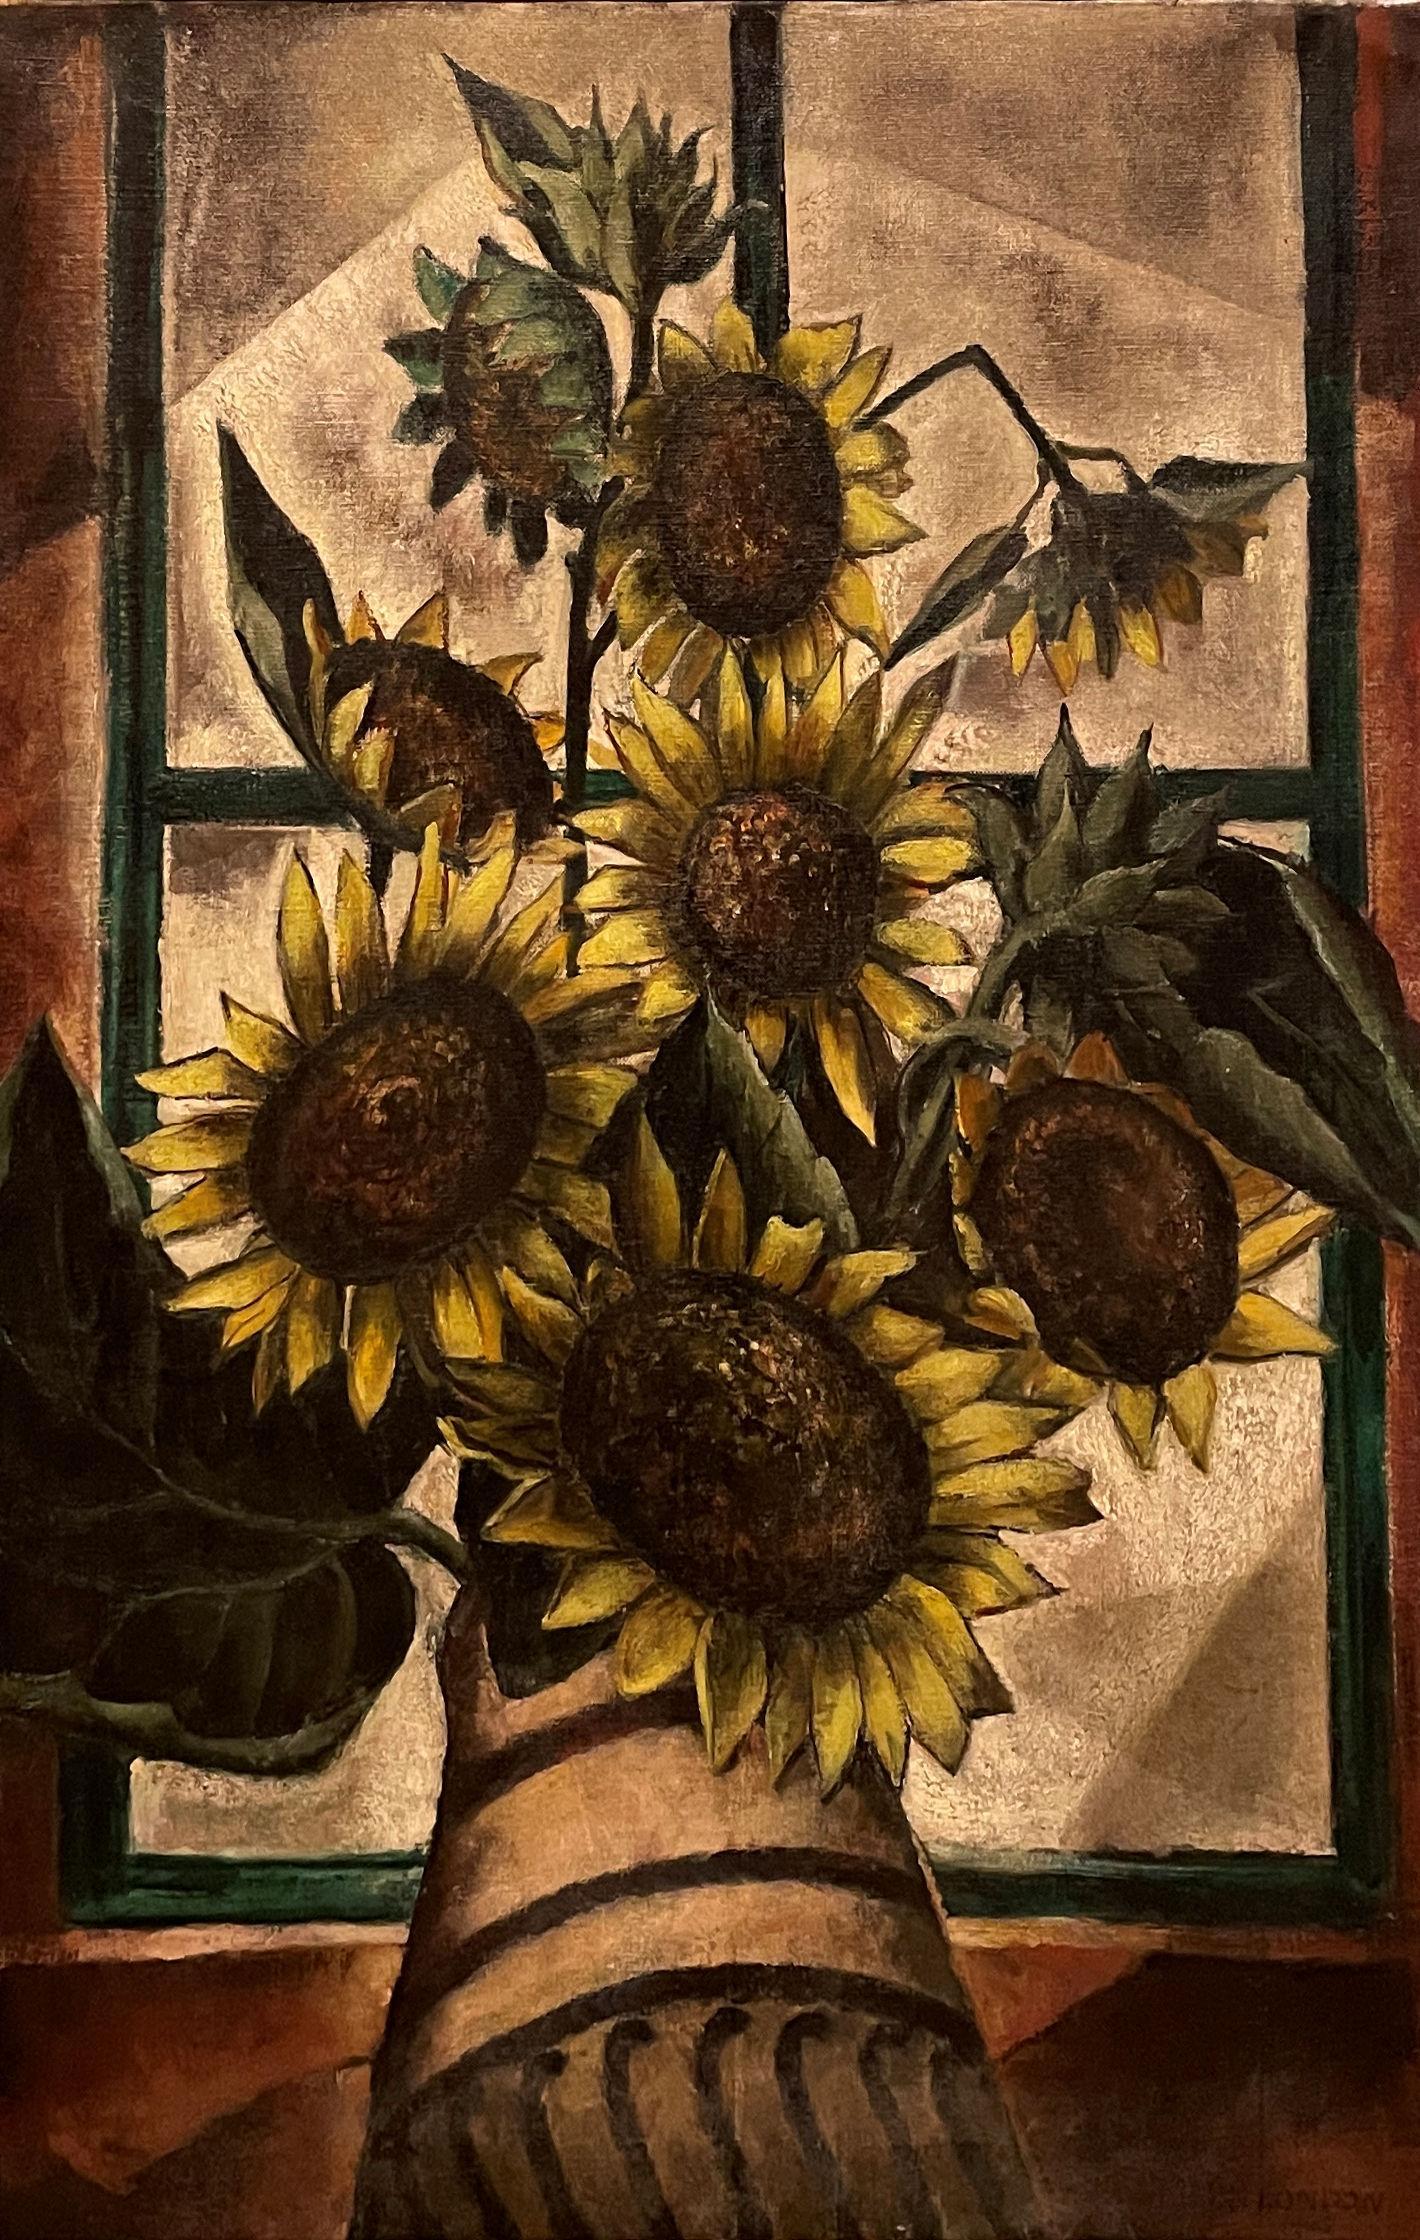 "Sunflowers, " Frank London, Modernist Yellow Floral Still Life with Window